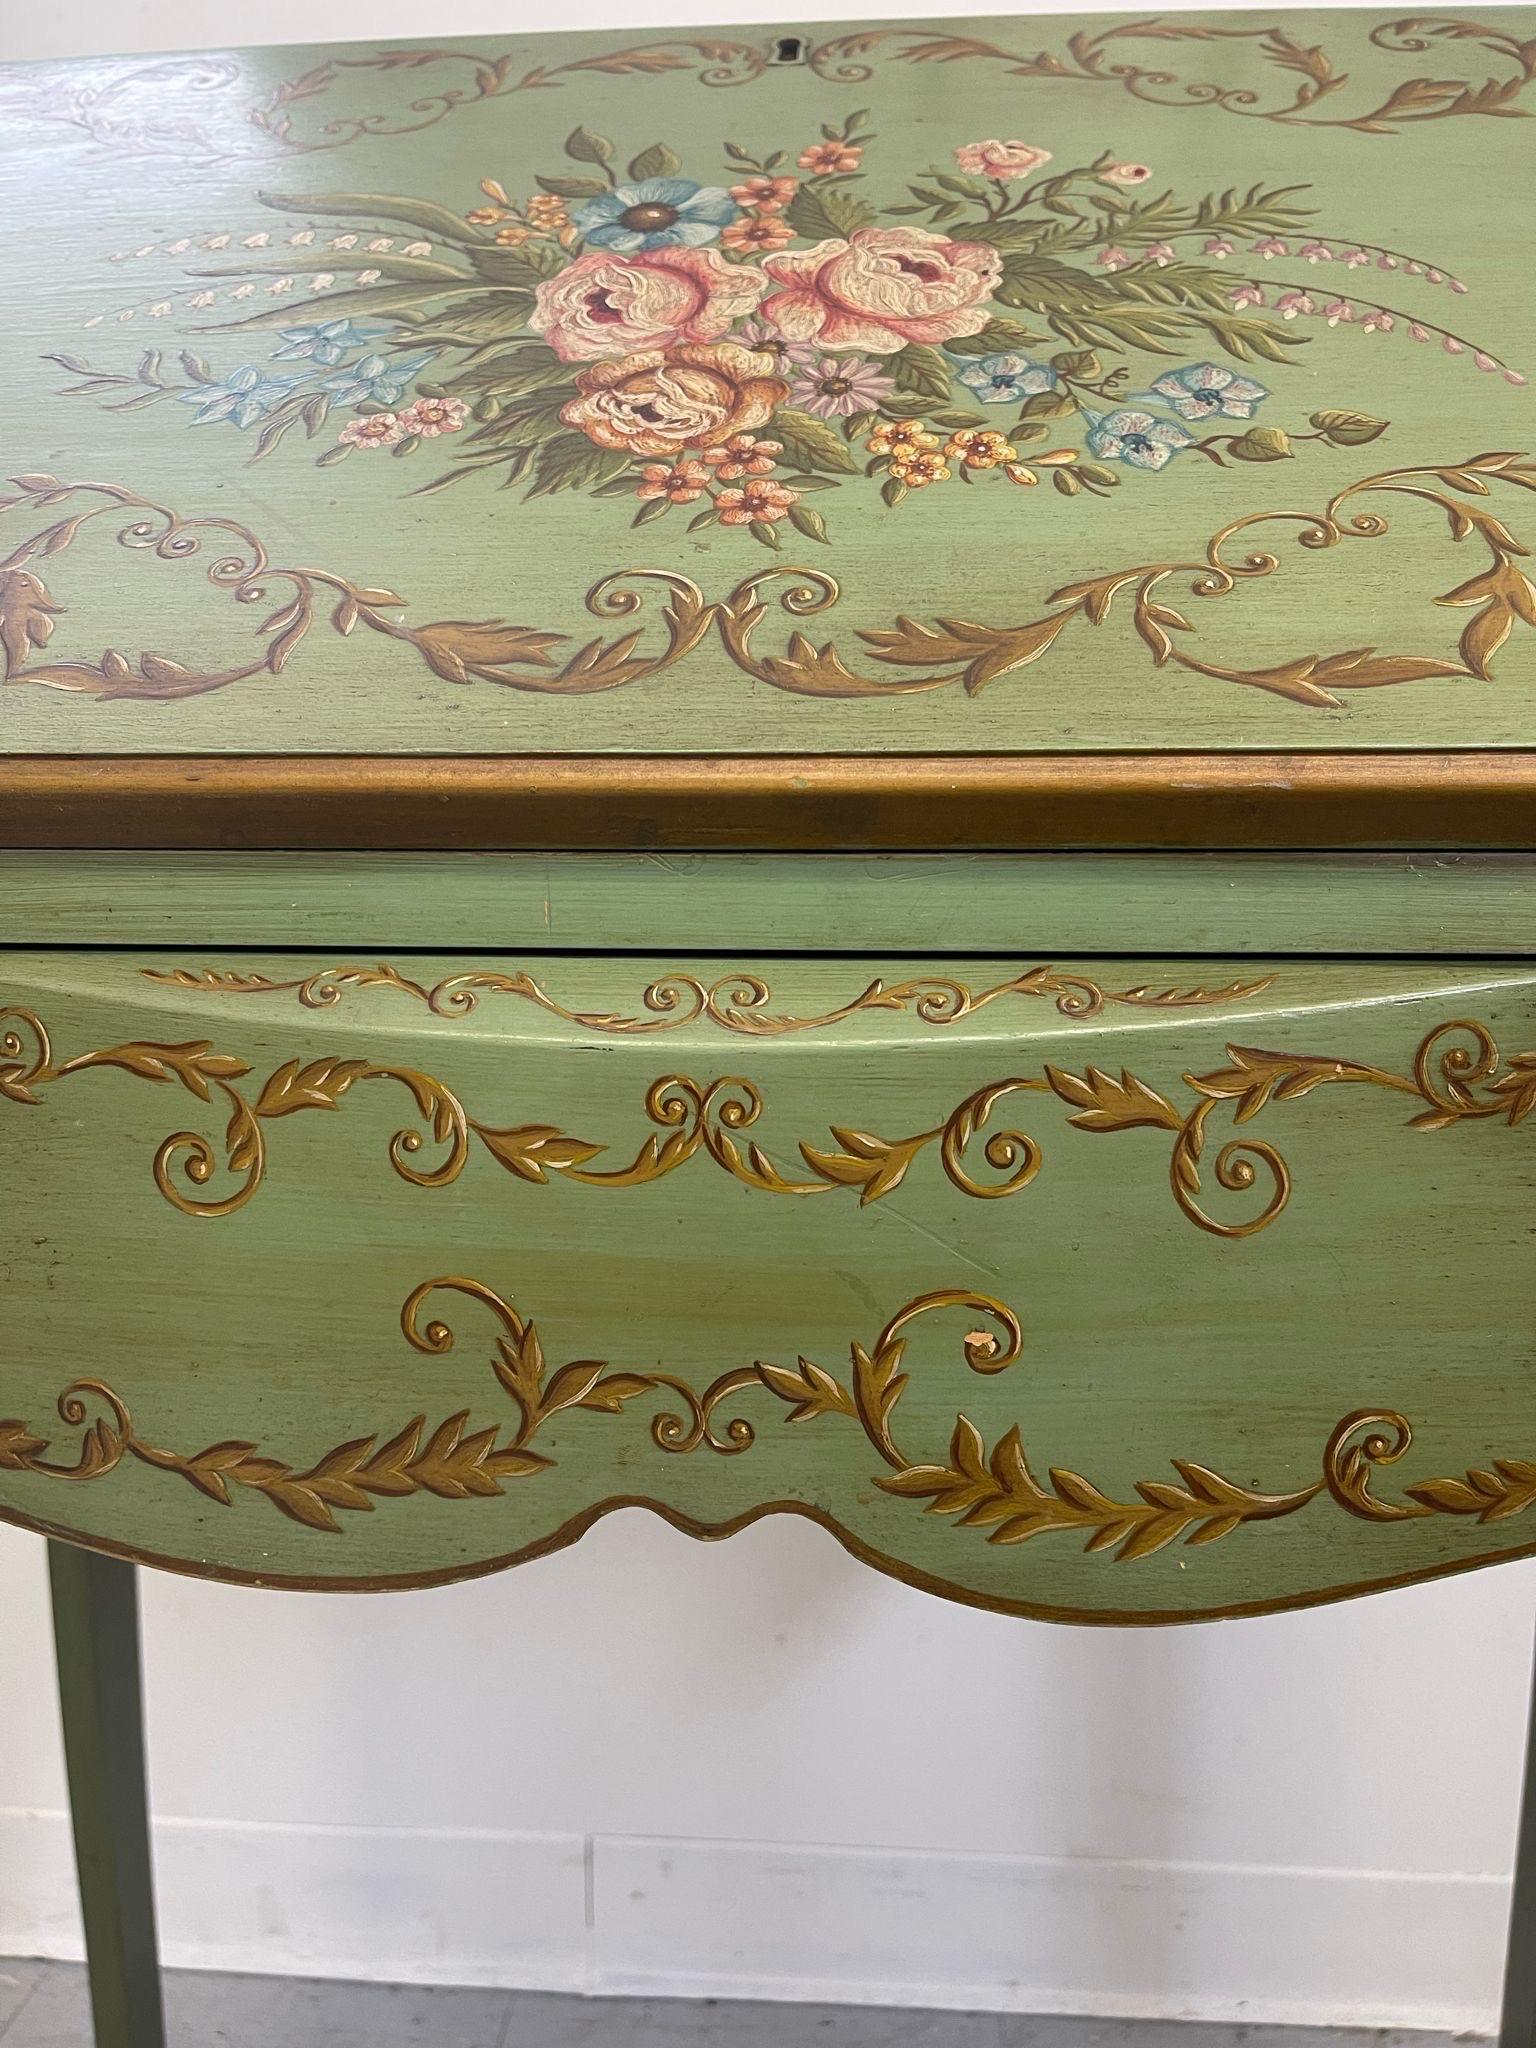 Vintage French Regency Style Bureau Desk With HandPainted Floral Motif and chair In Good Condition For Sale In Seattle, WA